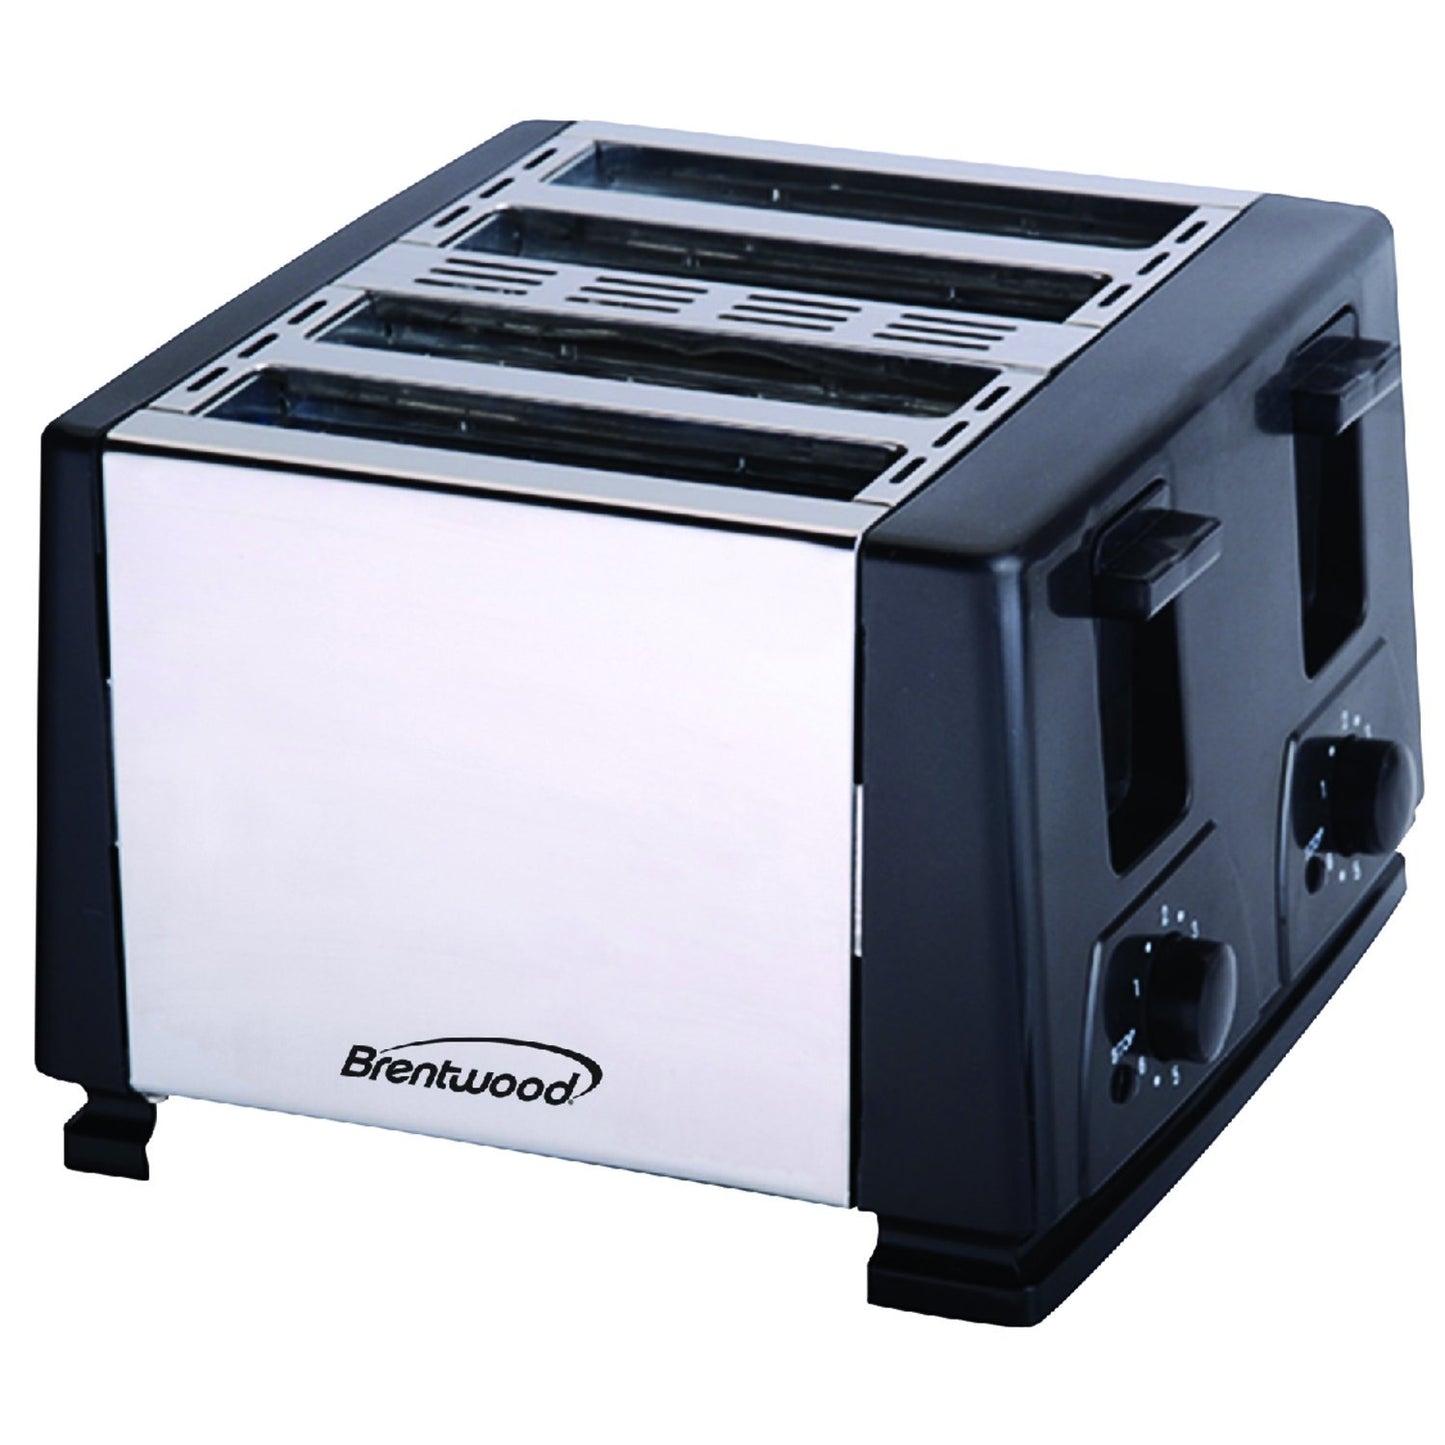 Brentwood Appliances TS284 4-Slice Toaster